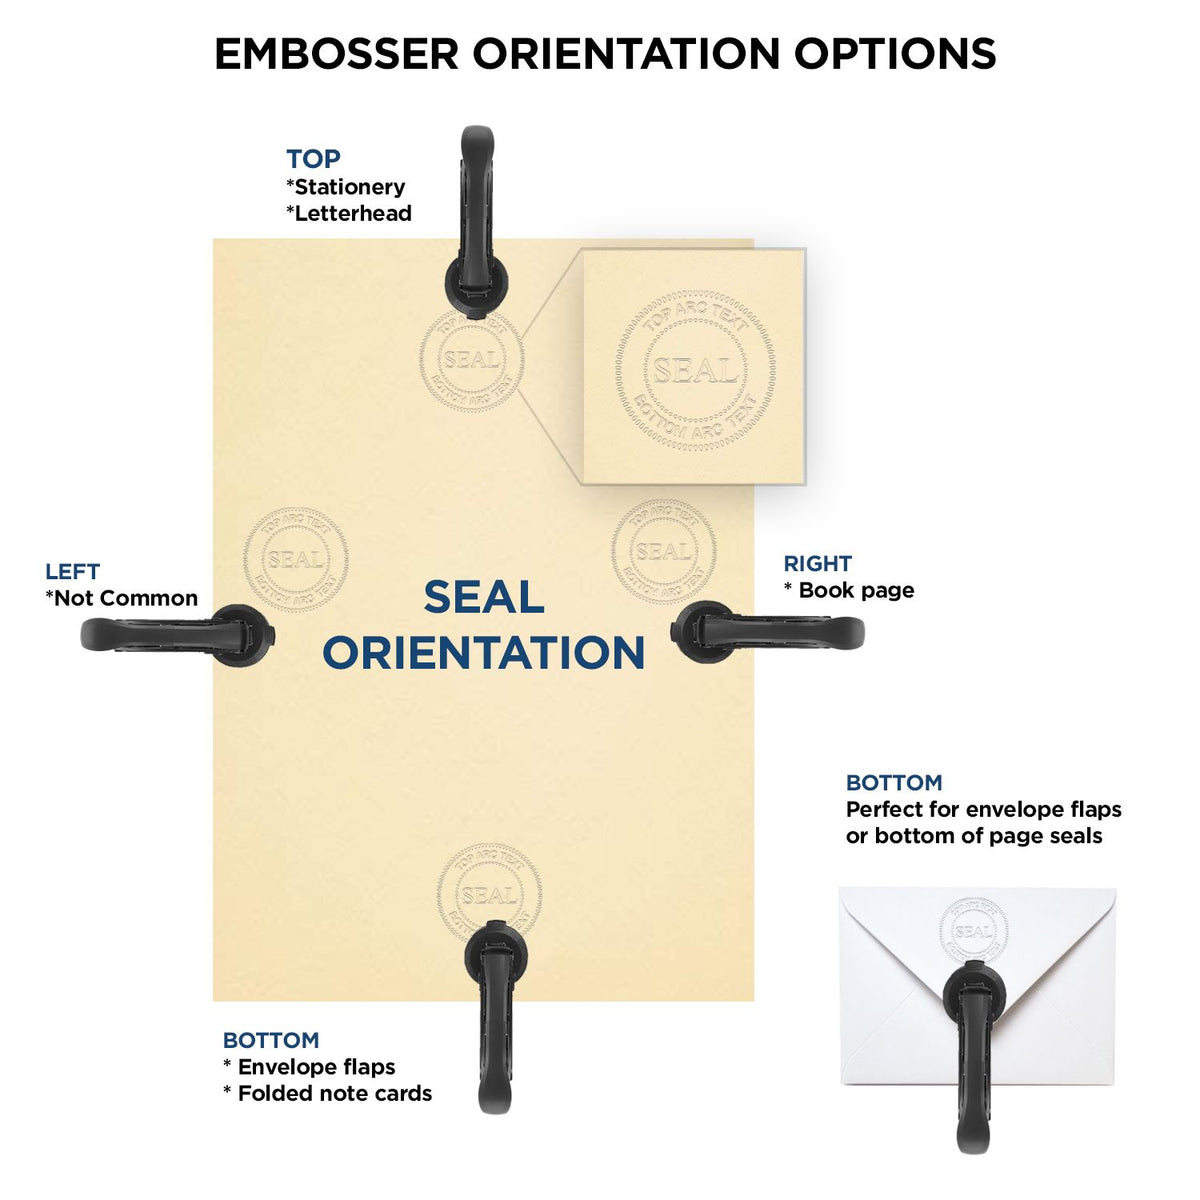 An infographic for the Handheld Kansas Architect Seal Embosser showing embosser orientation, this is showing examples of a top, bottom, right and left insert.